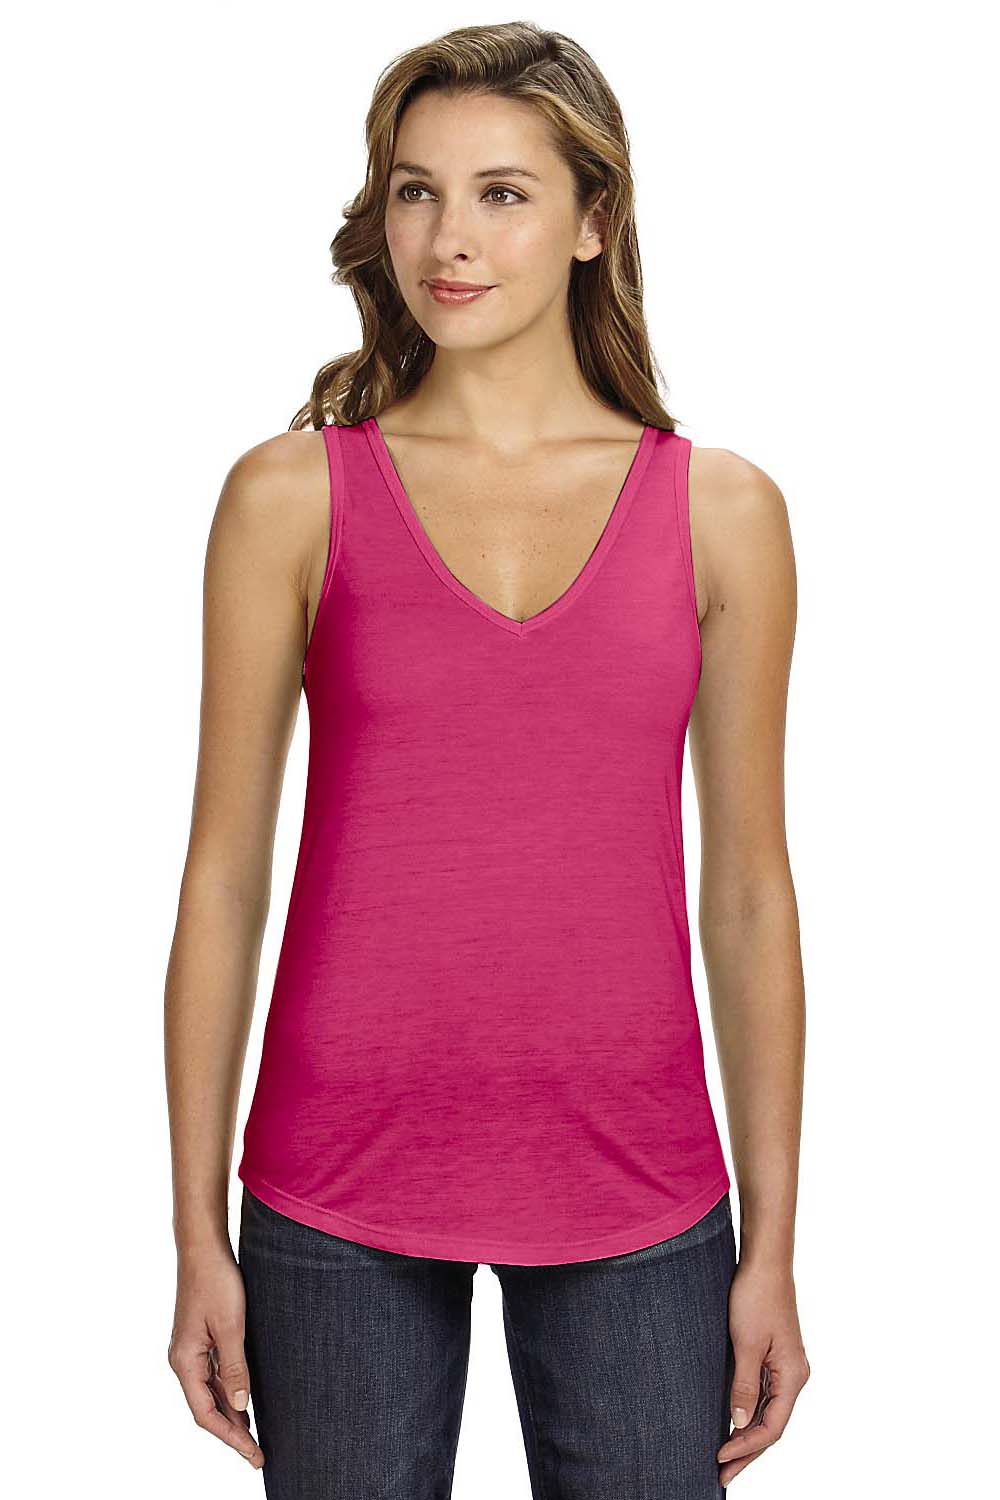 Bella + Canvas B8805 Womens Flowy Tank Top Berry Pink Front